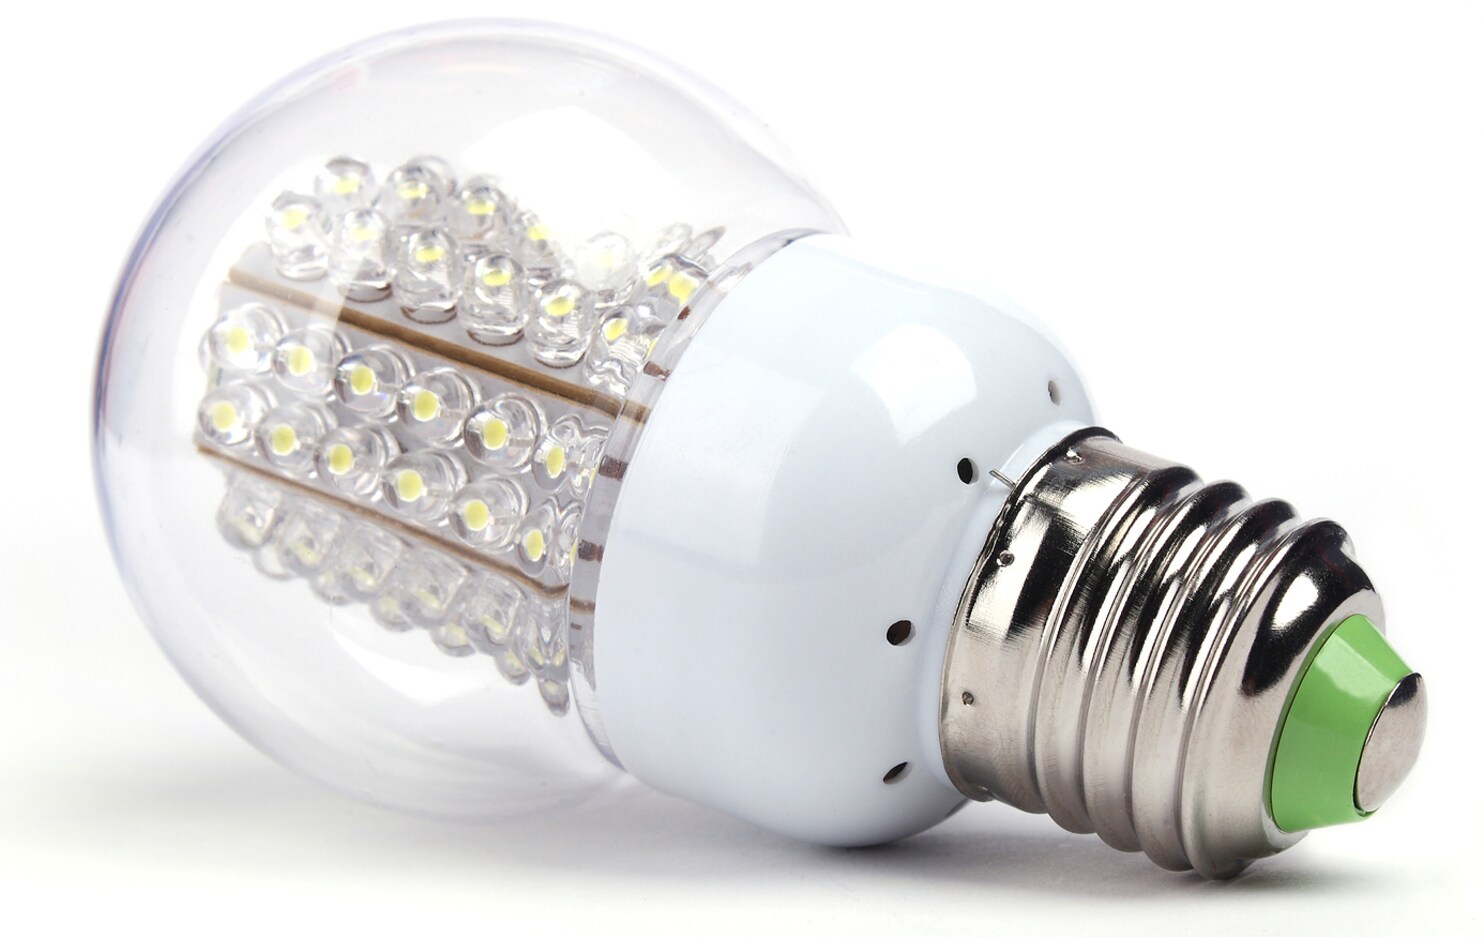 What Are Light Bulbs Made Of?